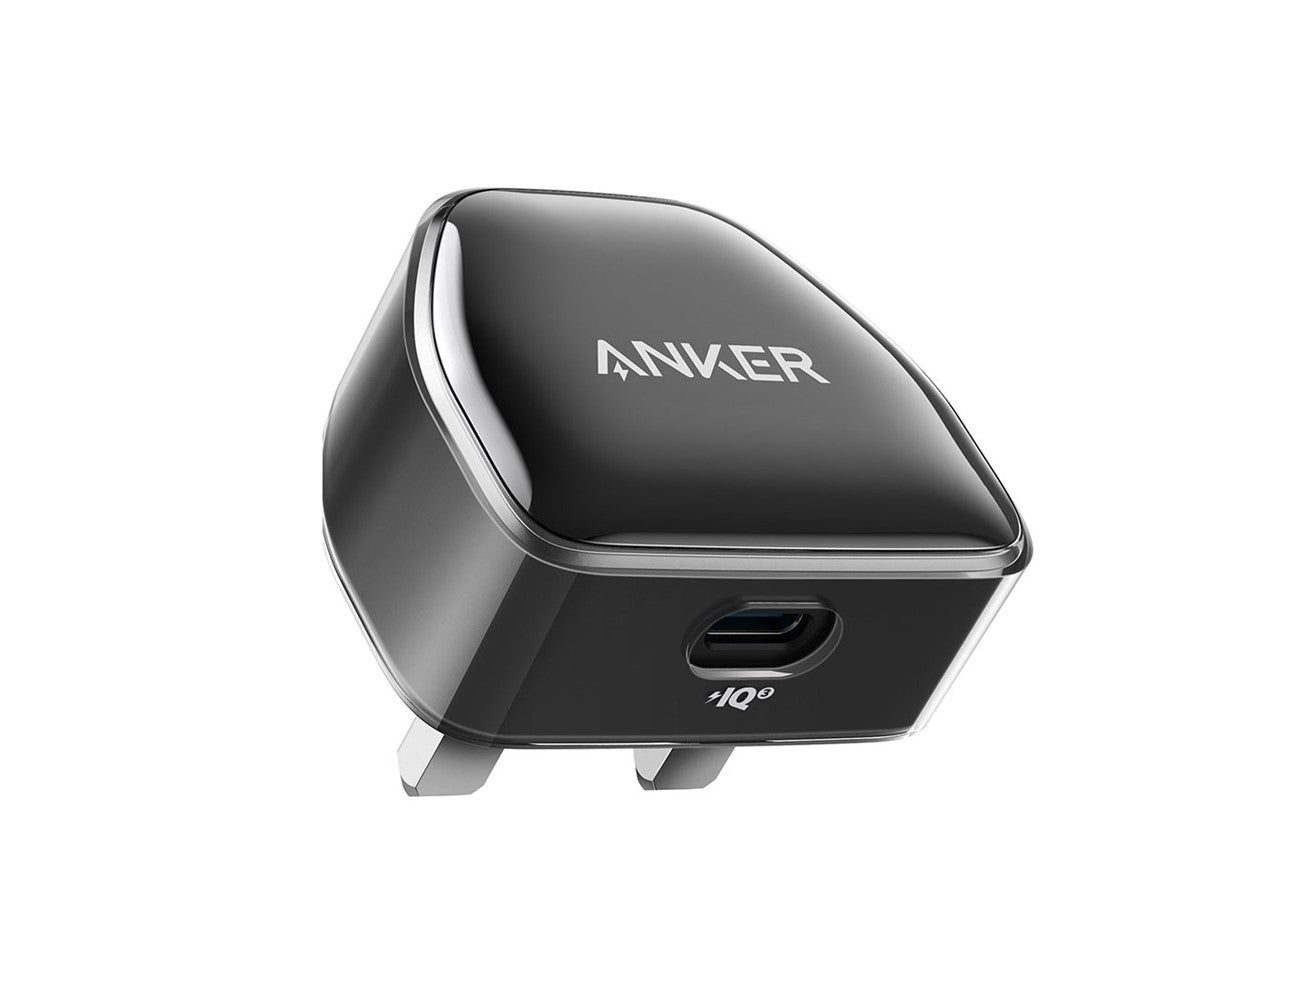 Anker USB C Charger 20W, 511 Charger (Nano Pro), PIQ 3.0 Durable Compact Fast Charger